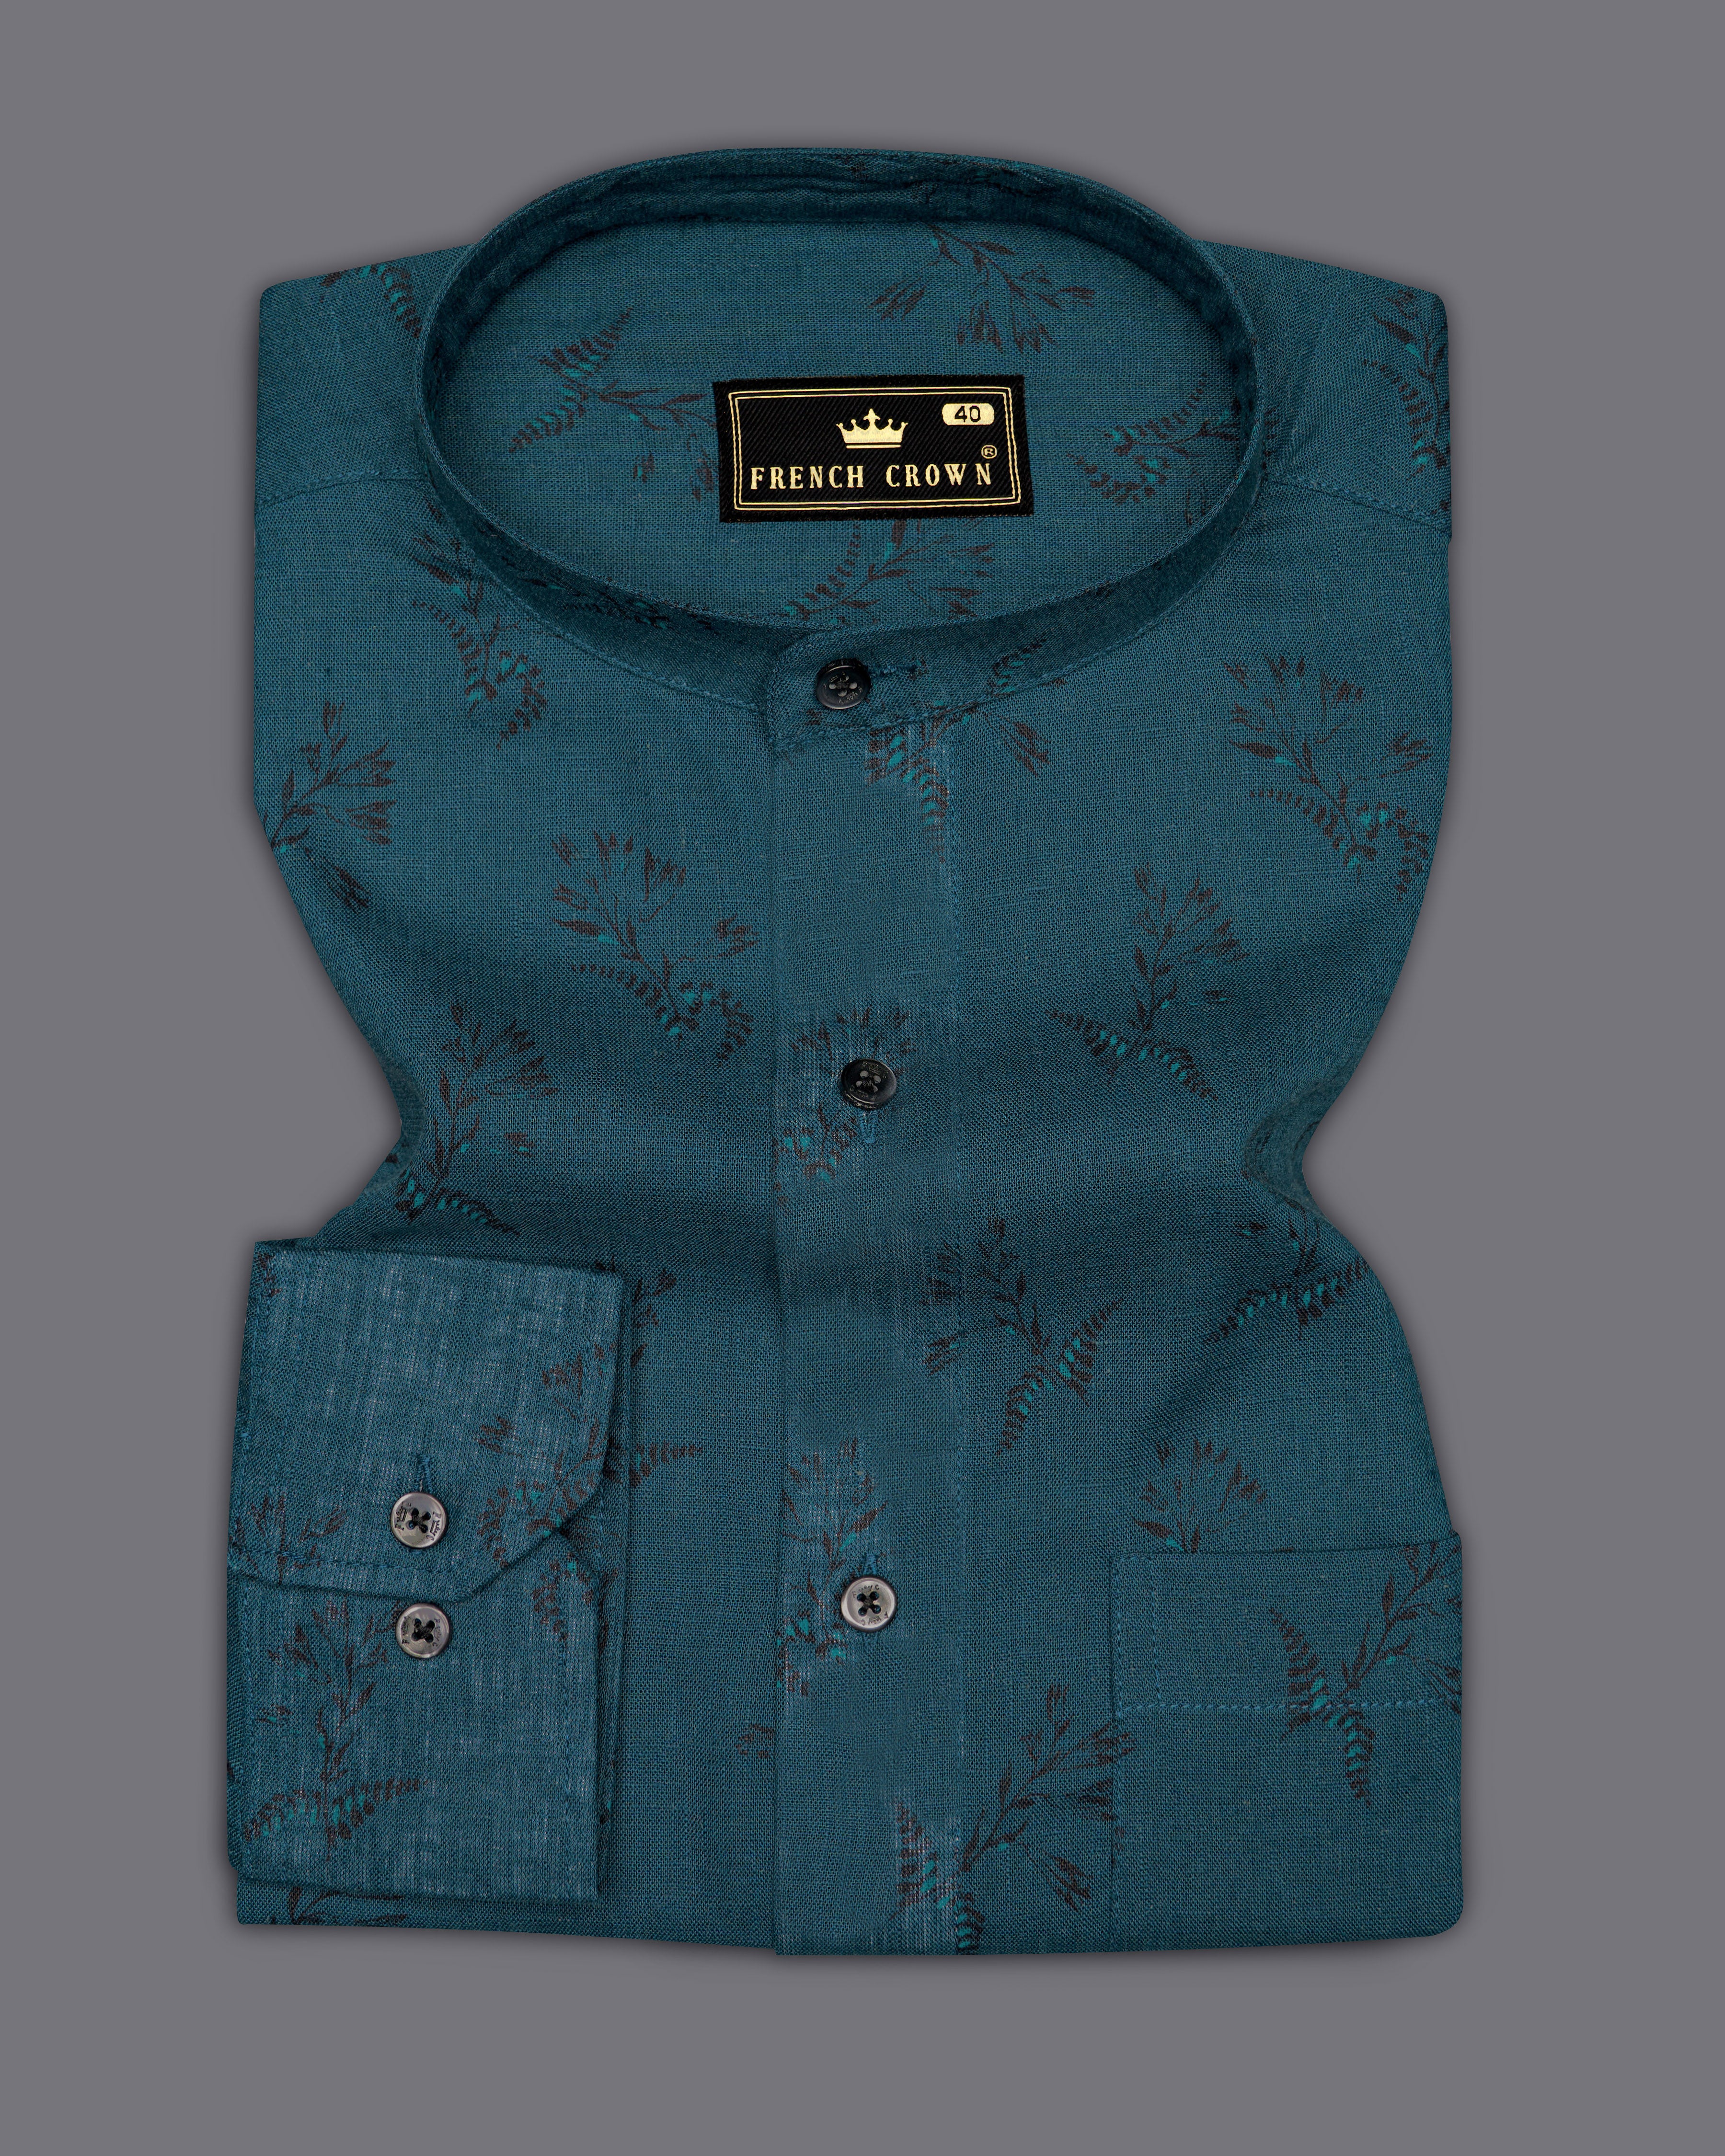 Cosmos Blue with Leaves Textured Luxurious Linen Shirt 9703-M-BLK-38, 9703-M-BLK-H-38, 9703-M-BLK-39, 9703-M-BLK-H-39, 9703-M-BLK-40, 9703-M-BLK-H-40, 9703-M-BLK-42, 9703-M-BLK-H-42, 9703-M-BLK-44, 9703-M-BLK-H-44, 9703-M-BLK-46, 9703-M-BLK-H-46, 9703-M-BLK-48, 9703-M-BLK-H-48, 9703-M-BLK-50, 9703-M-BLK-H-50, 9703-M-BLK-52, 9703-M-BLK-H-52